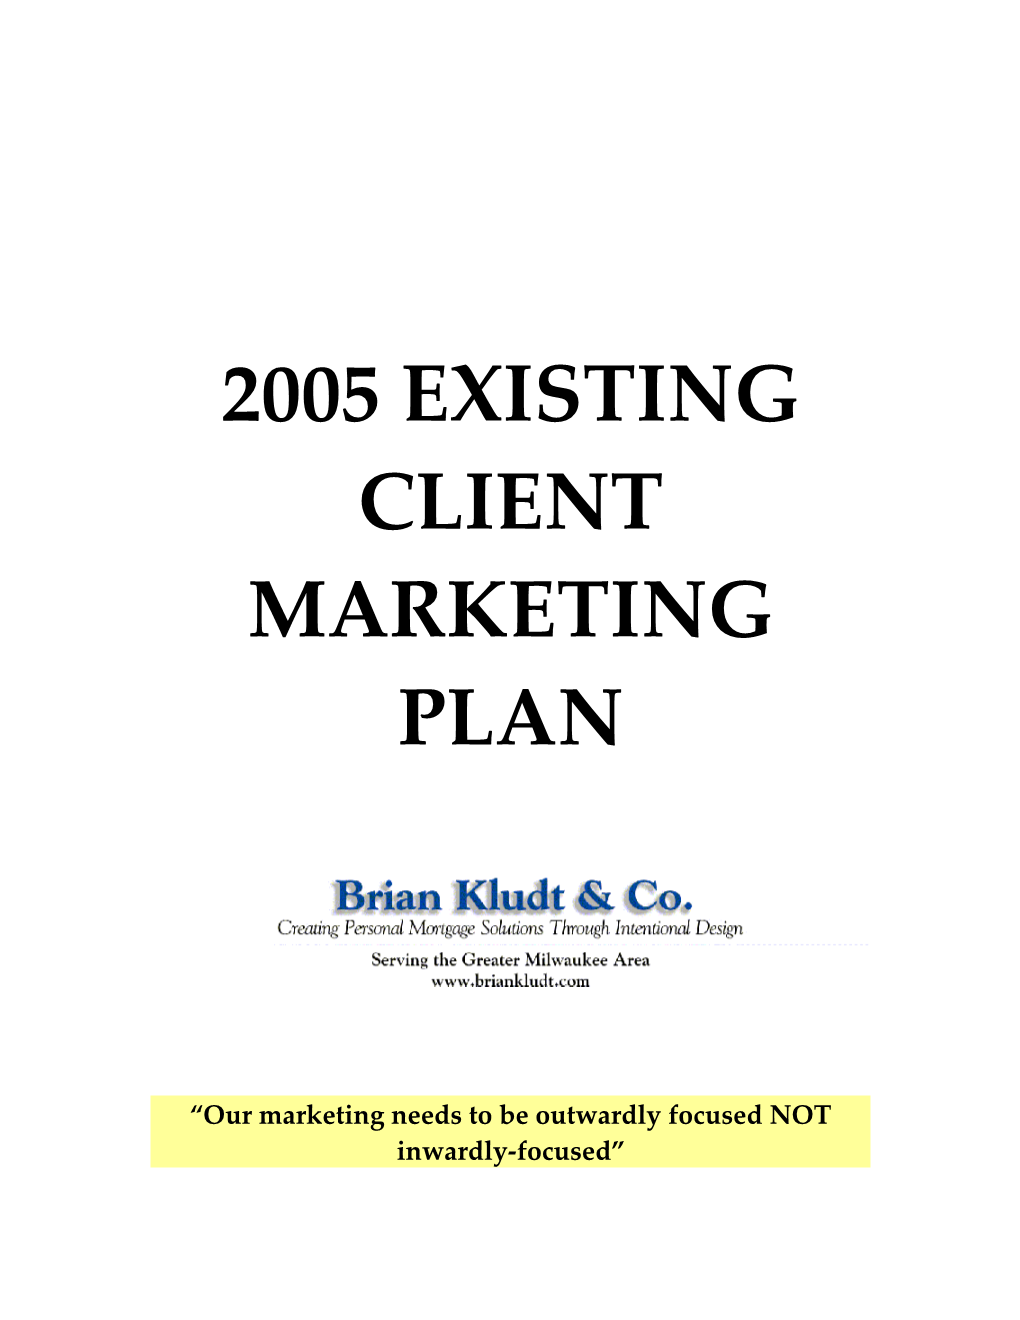 2005 Existing Client Marketing Plan